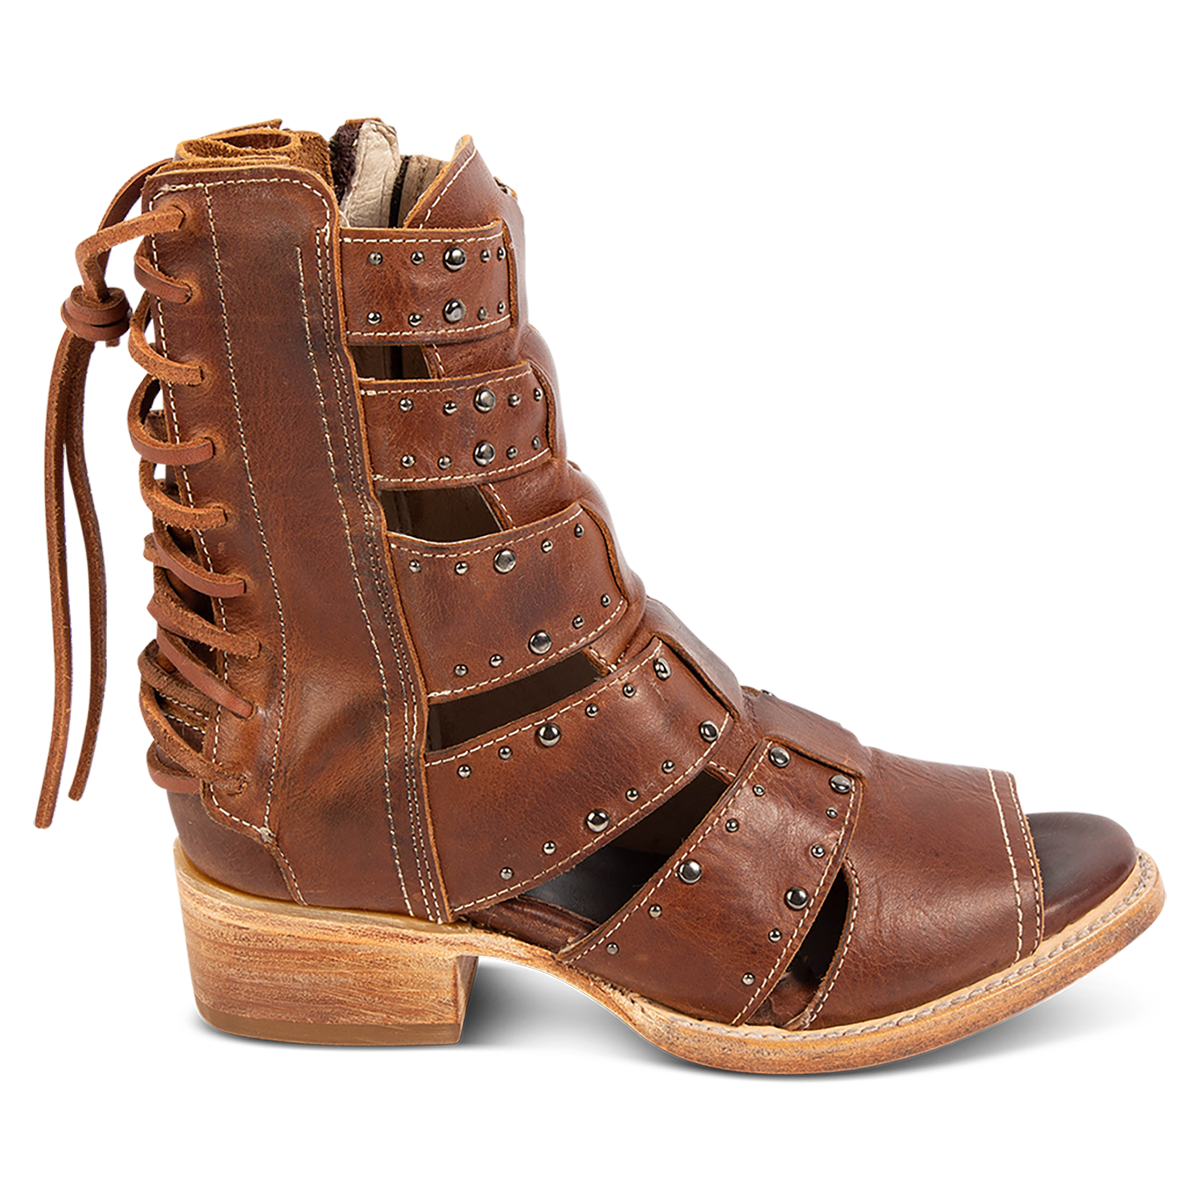 FREEBIRD women's Ghost tan leather sandal with an inside working brass zipper, back panel lacing and an exposed exterior